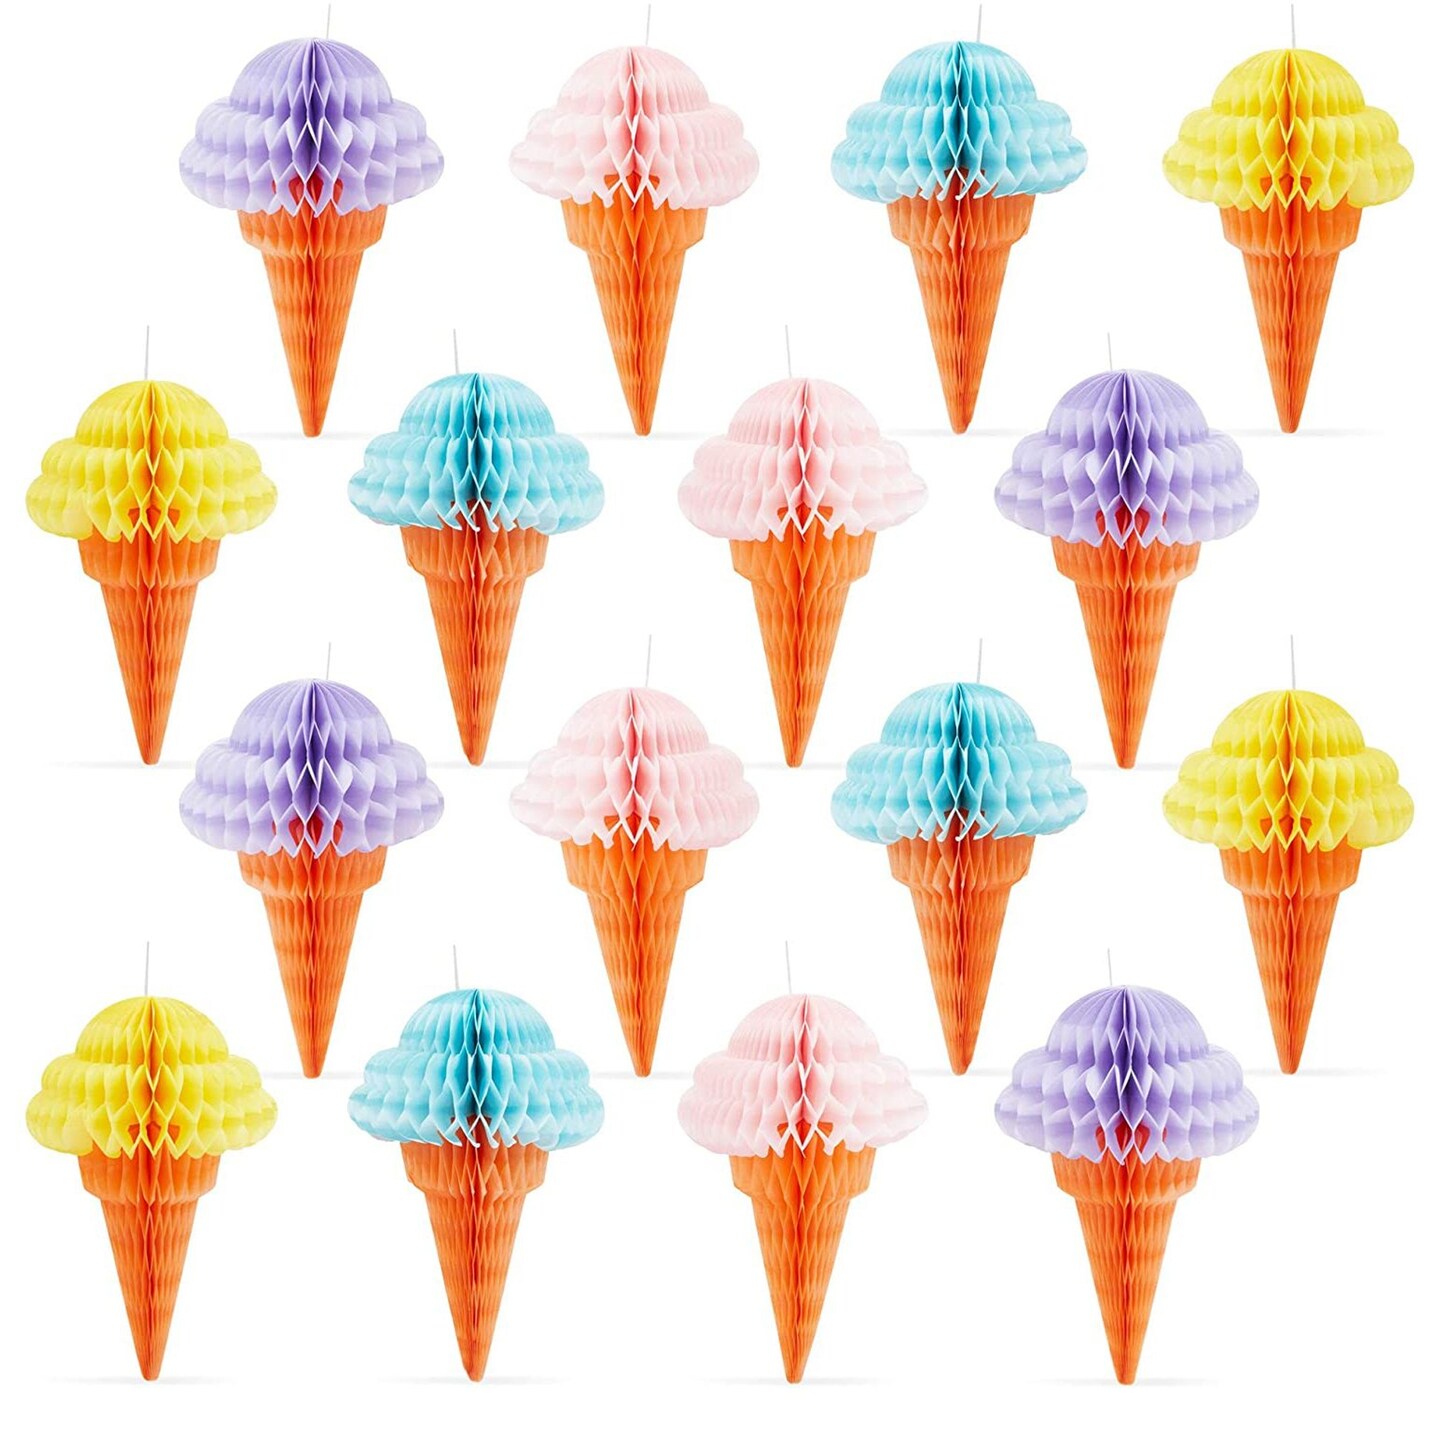 16 Pack Hanging Honeycomb Ice Cream Party Decorations for Birthday, Baby Shower, Celebration, 4 Colors (4 x 6 In)